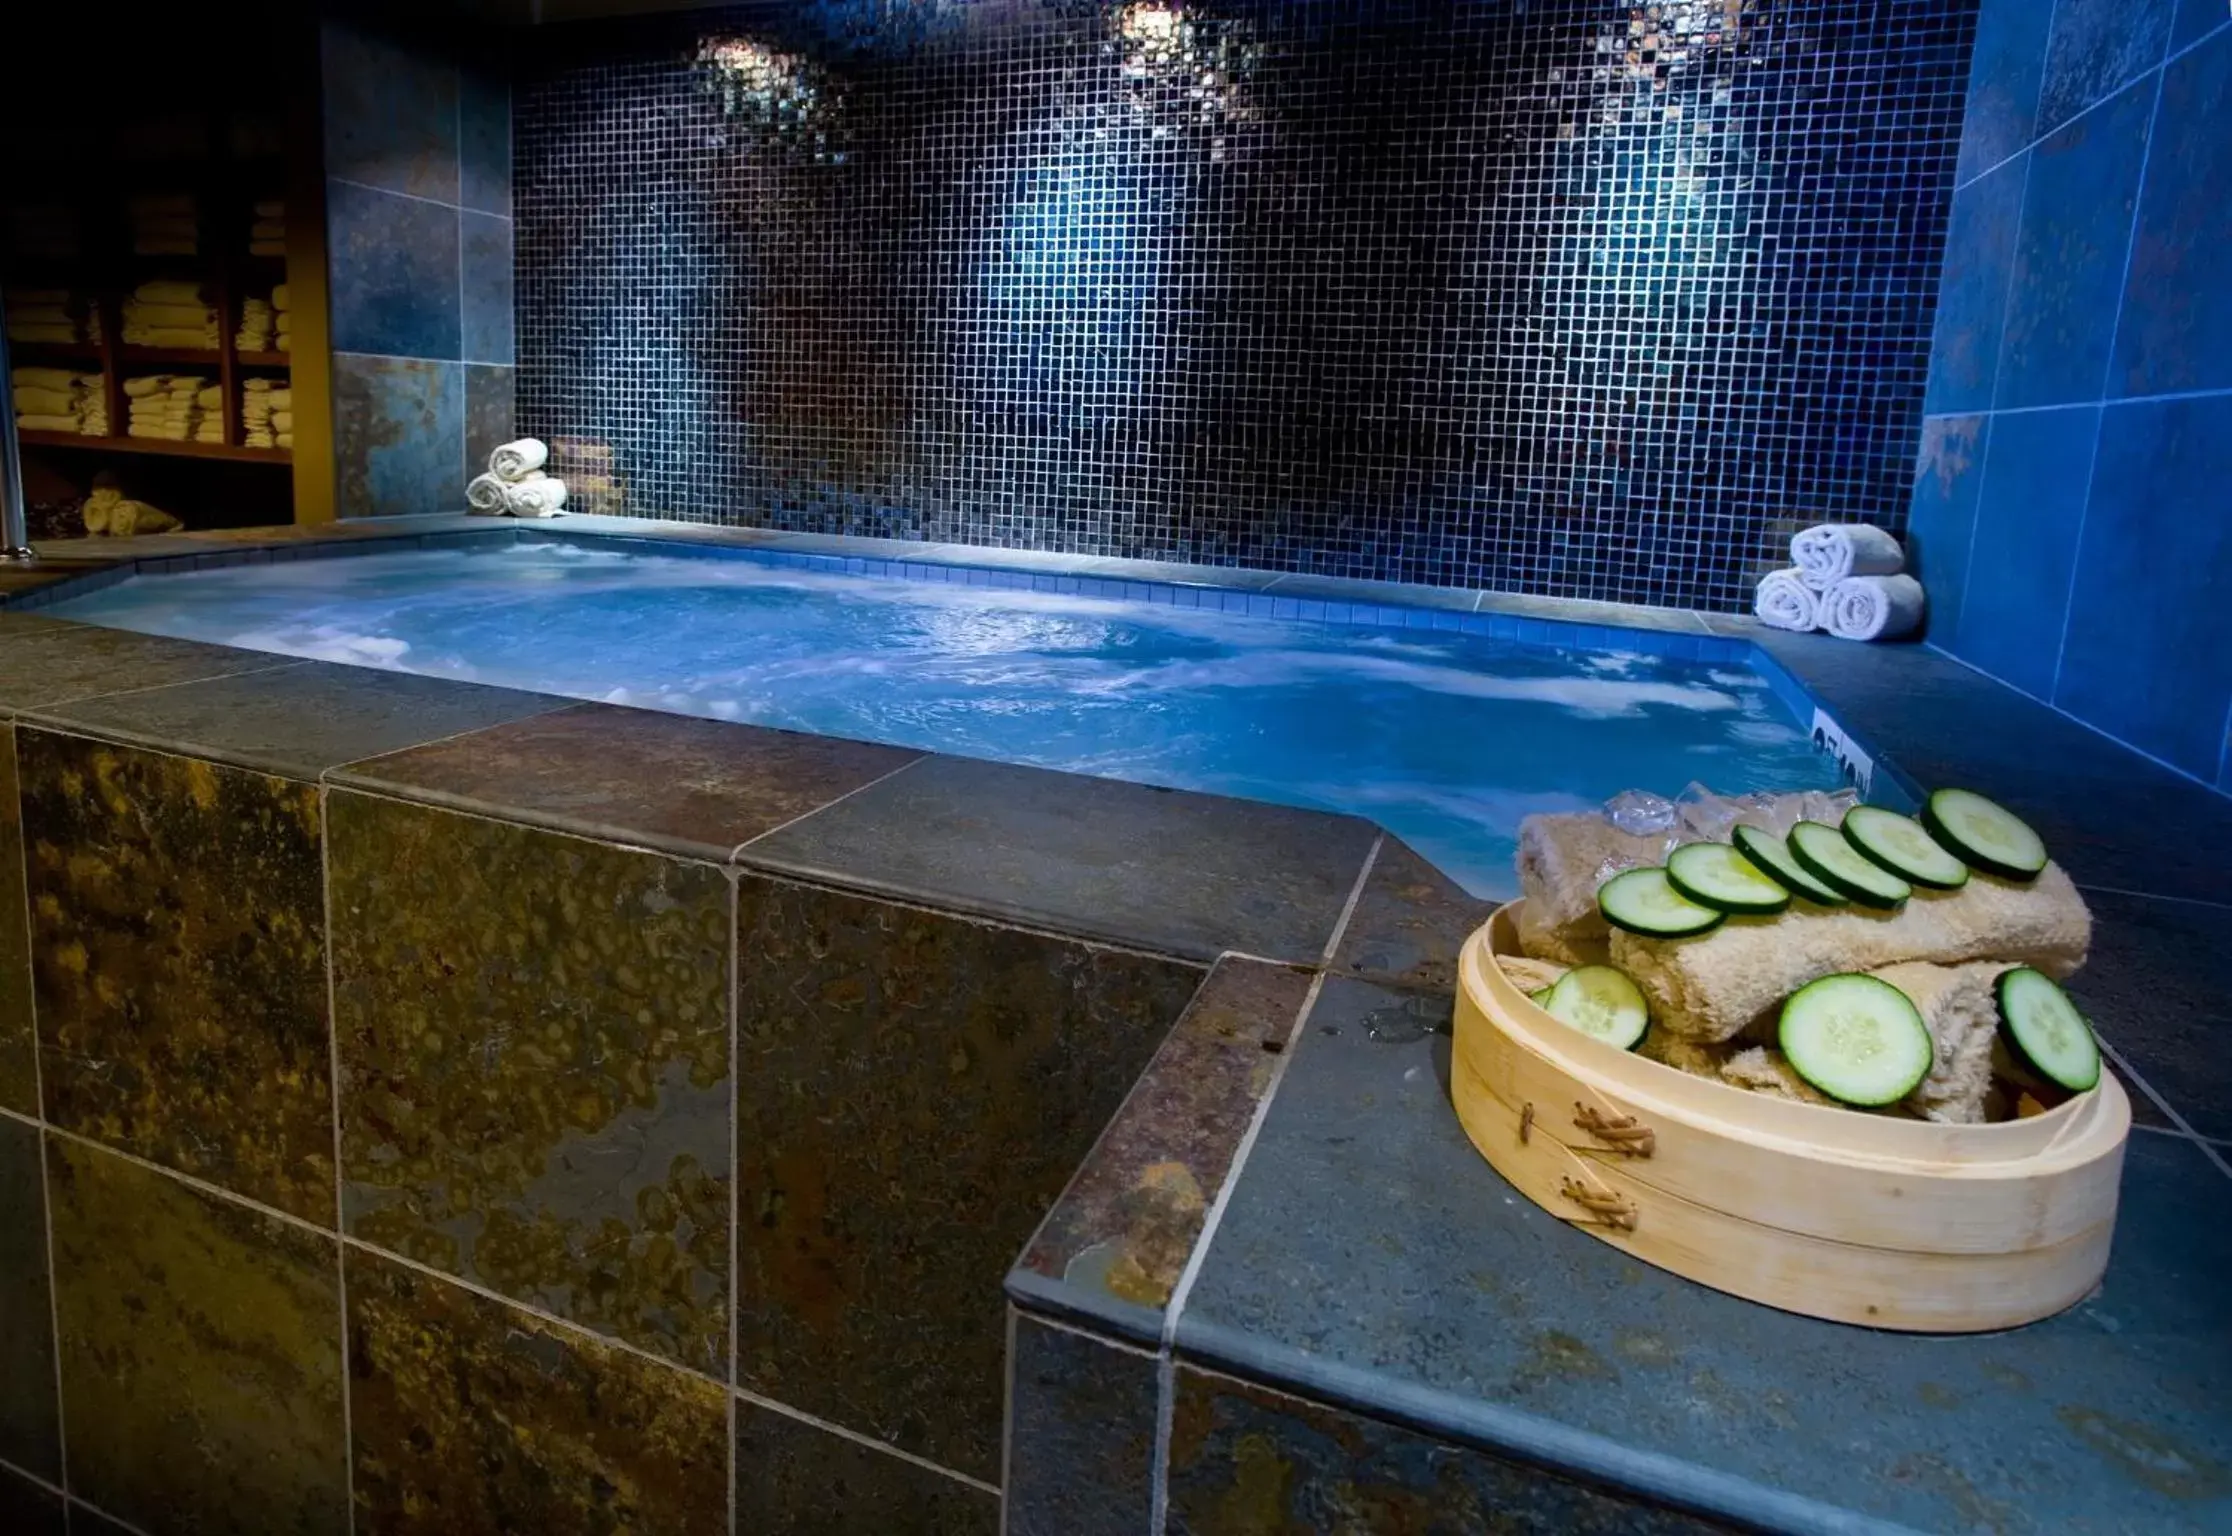 Hot Tub, Swimming Pool in Teton Mountain Lodge and Spa, a Noble House Resort